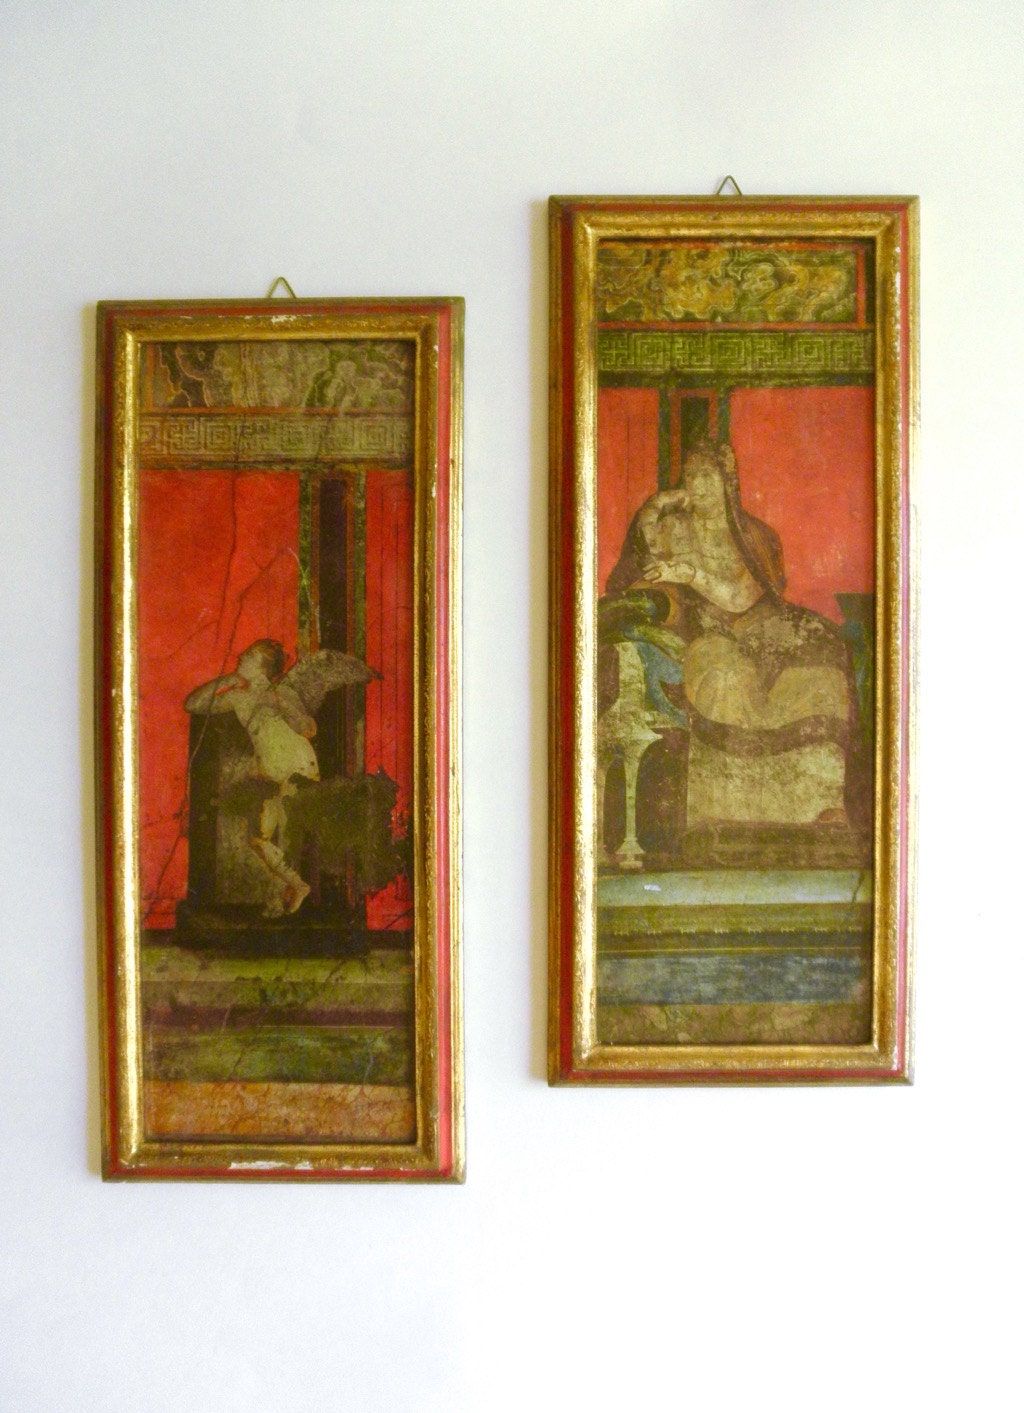 Pompeii Mural Framed Prints Art Pair Made In Italy 60s Throughout Most Popular Italy Framed Art Prints (View 3 of 20)